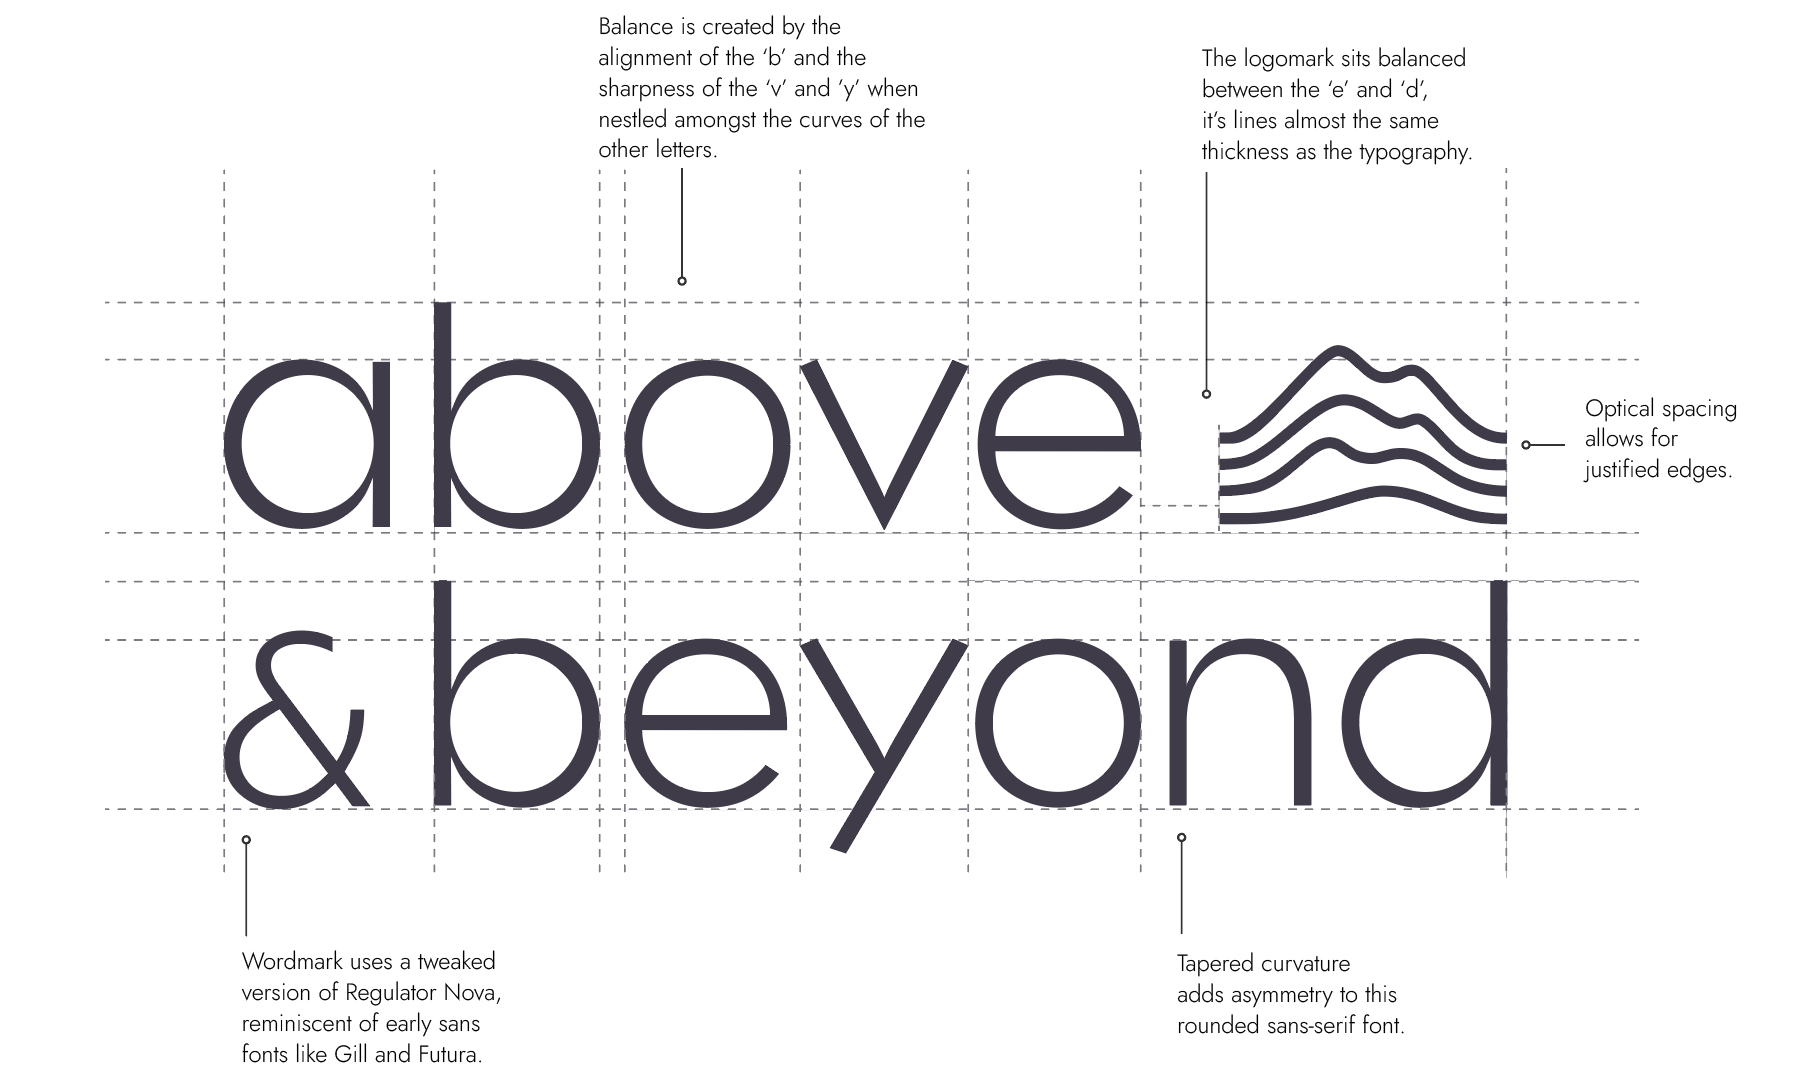 An illustration showing the anatomy of the above and beyond logo. Including some notes that say: 1, Balance is created by the alignment of the 'b' and the sharpness of the 'v' and 'y' when nestled among the curves of the other letters.  2, the logomark sits balanced between the 'e' and 'd', it's lines almost the same thickness as the typography. 3. optical spacing allows for justified margins. 4, wordmark uses a tweaked version of Regulator Nova, reminiscent of early sans fonts like Gill and Futura. 5, Tapered curvature adds symmetry to this rounded sans-serif font.